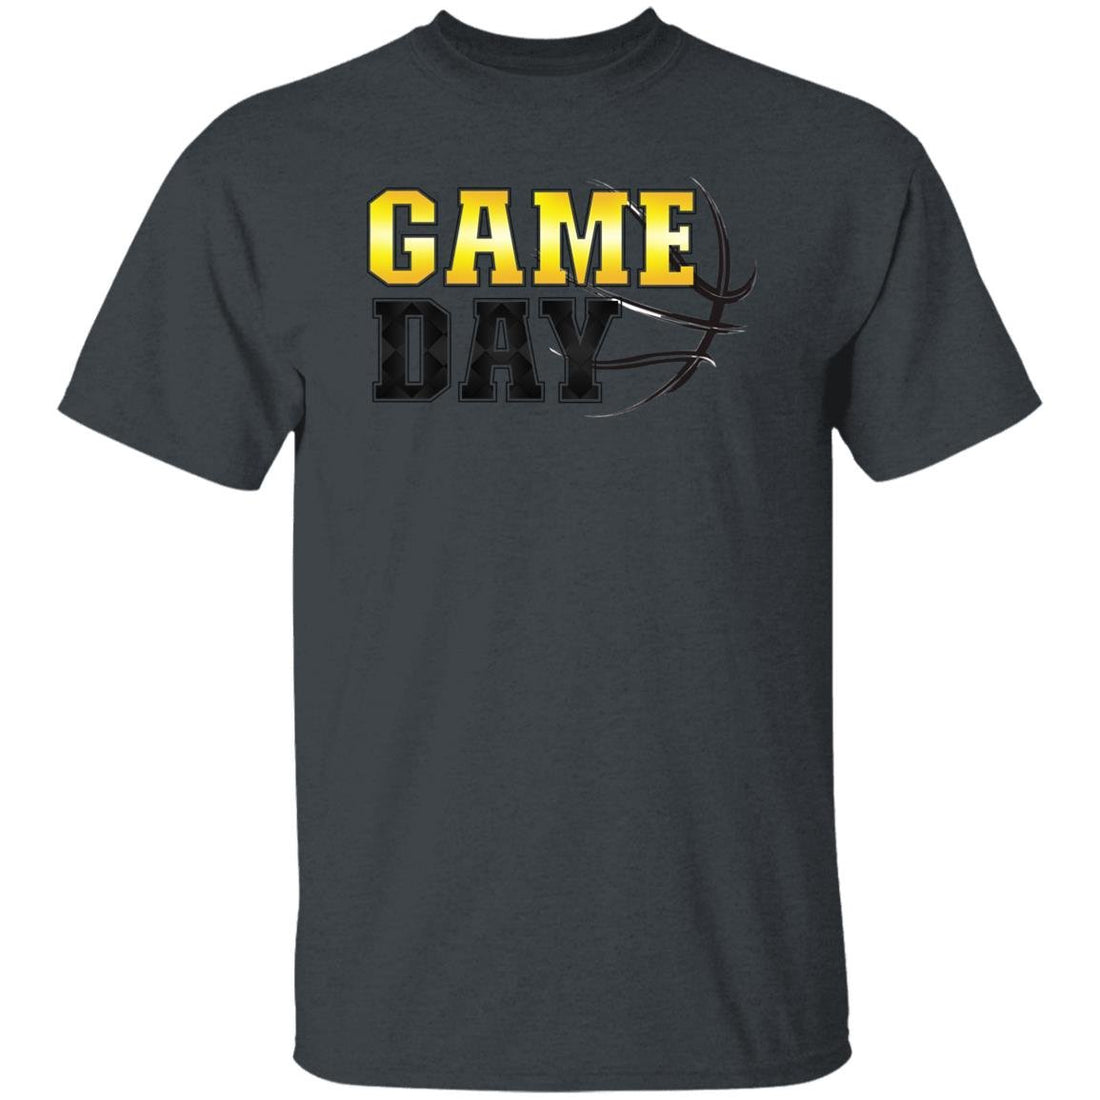 Game Day in Shock T-Shirt - T-Shirts - Positively Sassy - Game Day in Shock T-Shirt